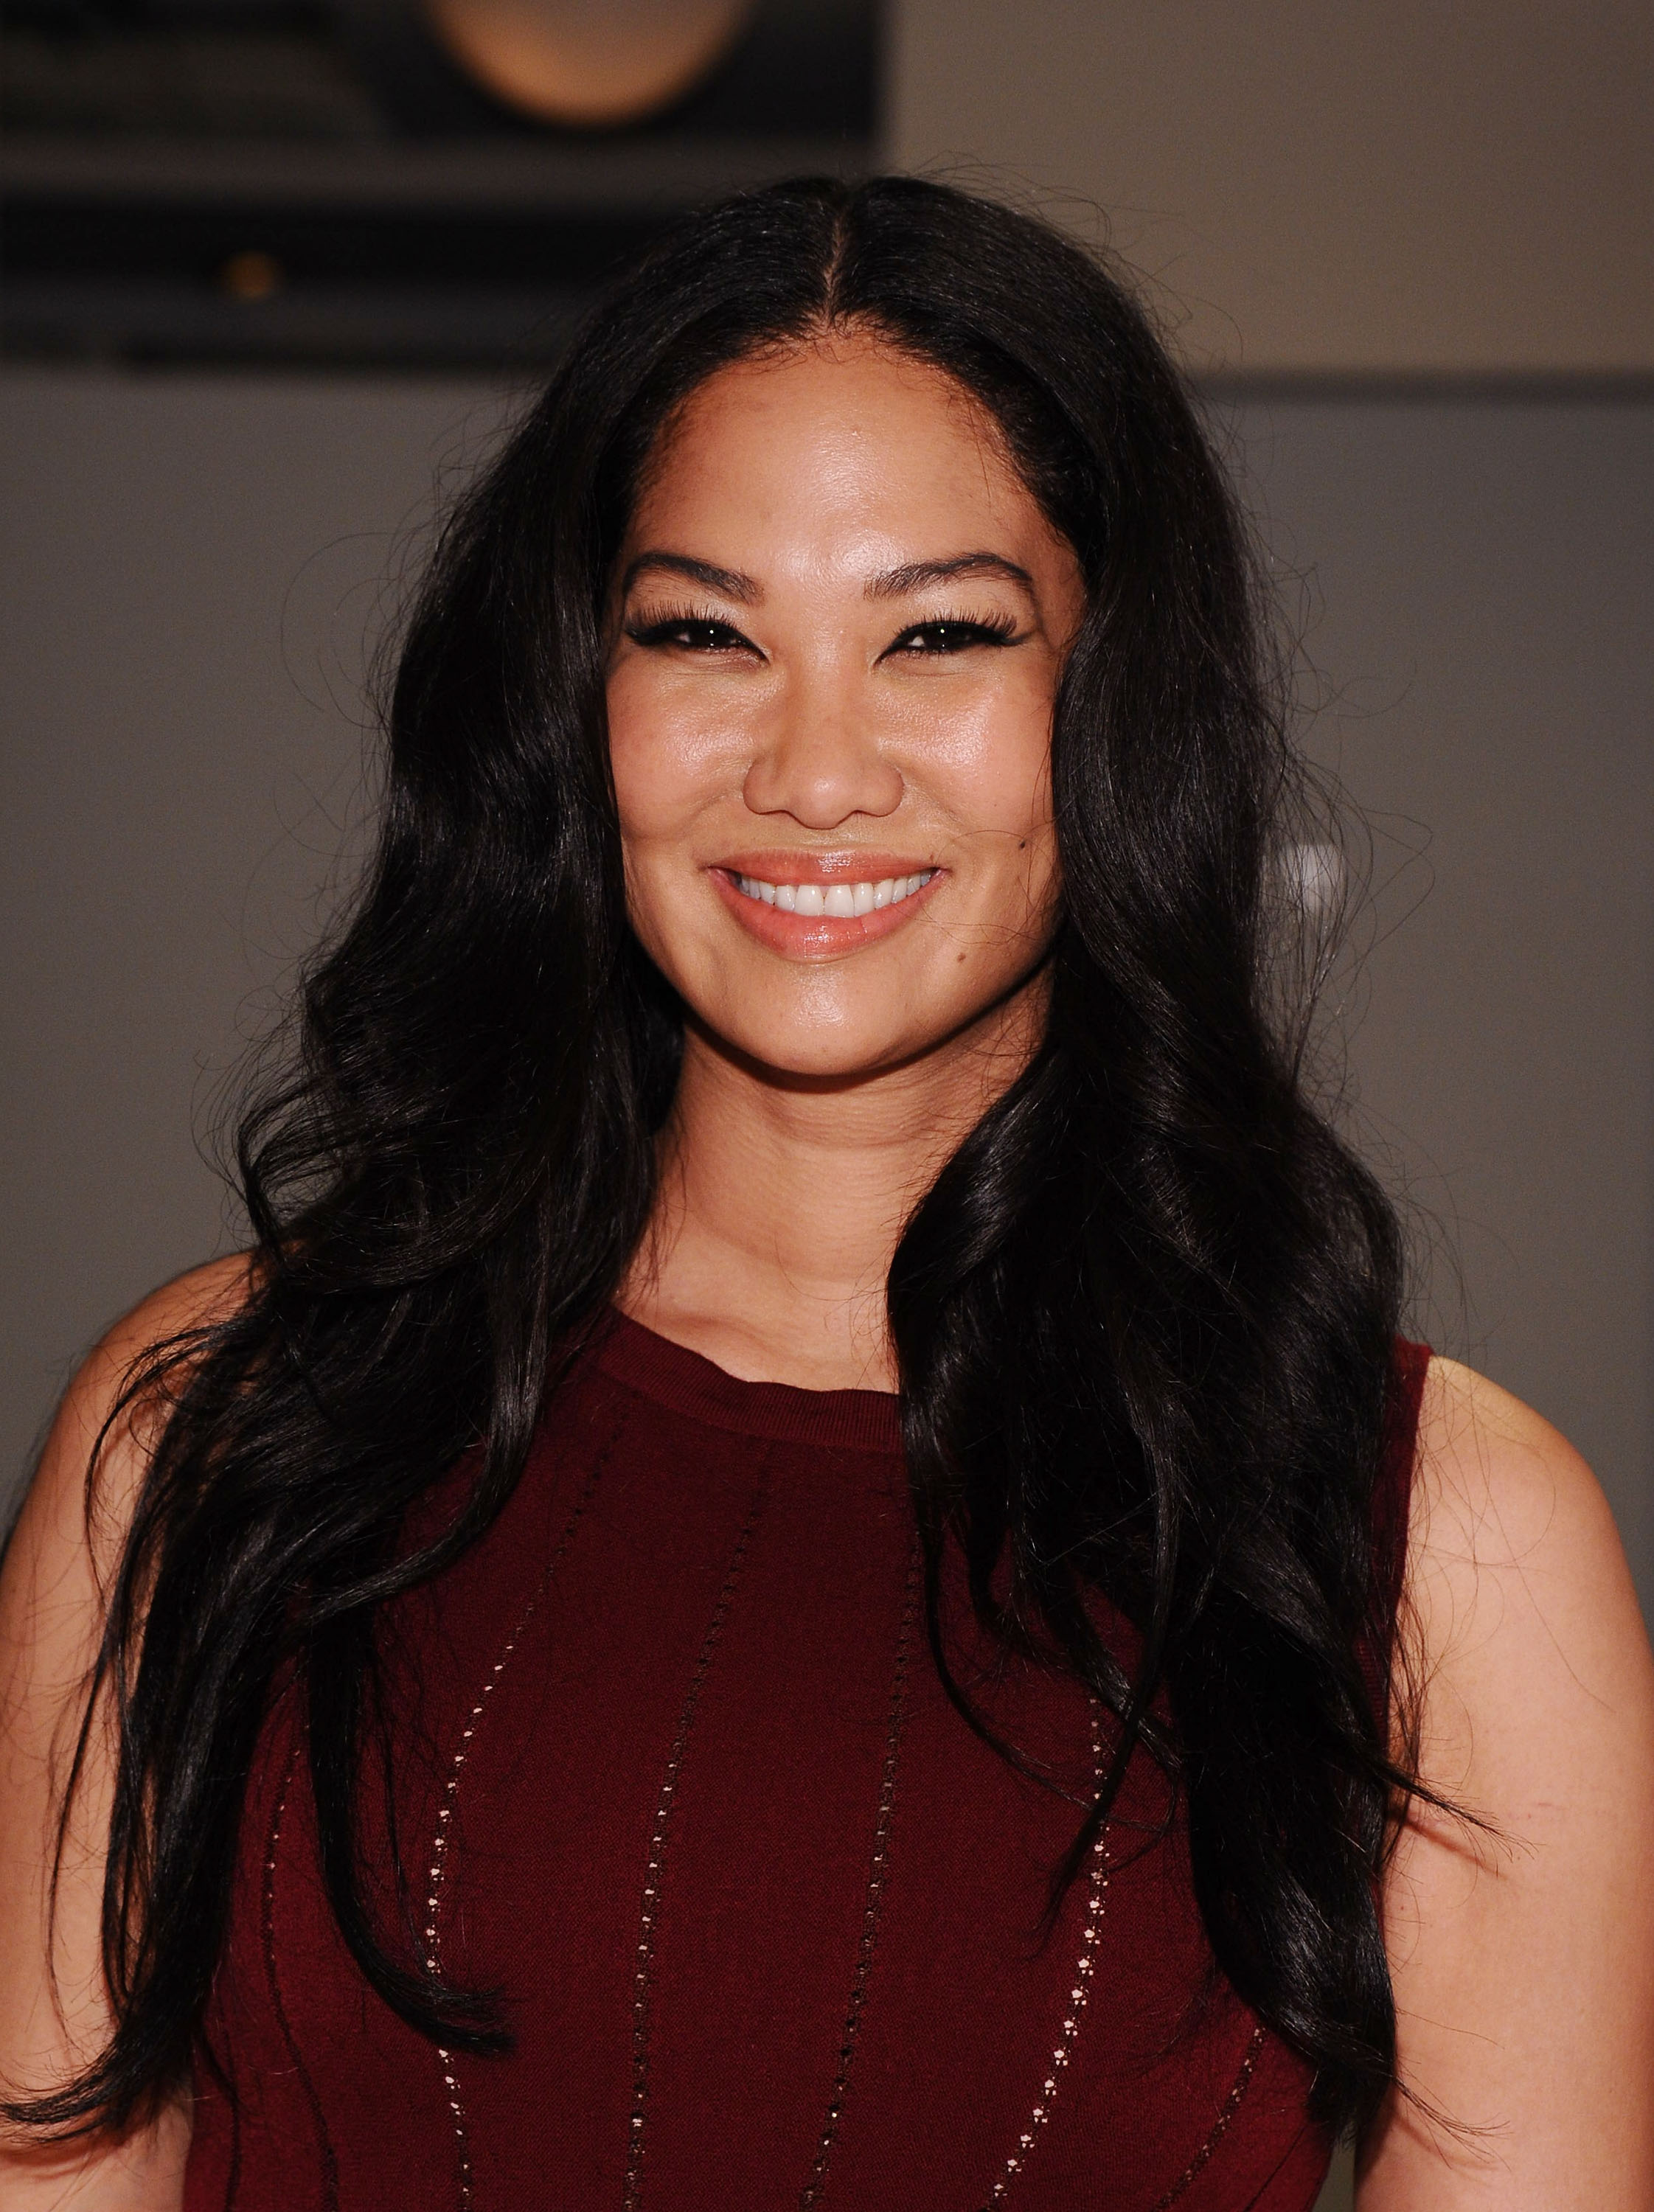 Kimora Lee Simmons at the Argyleculture By Russell Simmons fashion show during Mercedes-Benz Fashion Week in September 2014. | Source: Getty Images